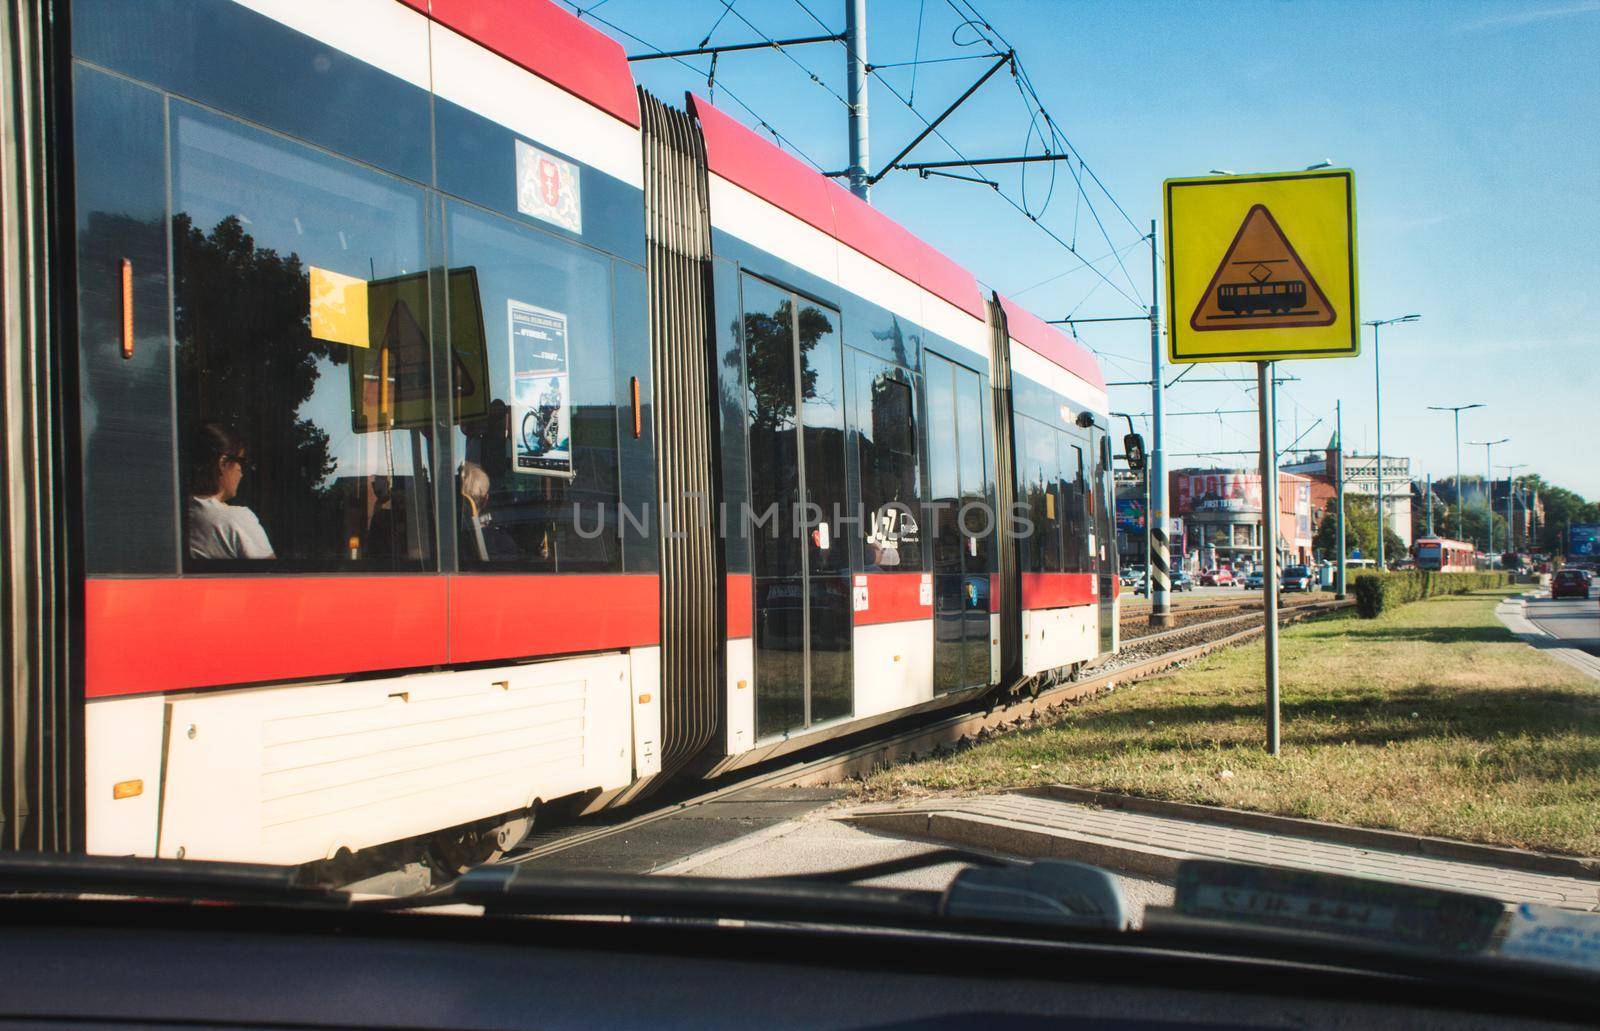 Gdansk / Poland - August 9 2019: Urban tram transporting people across the city by tennesseewitney